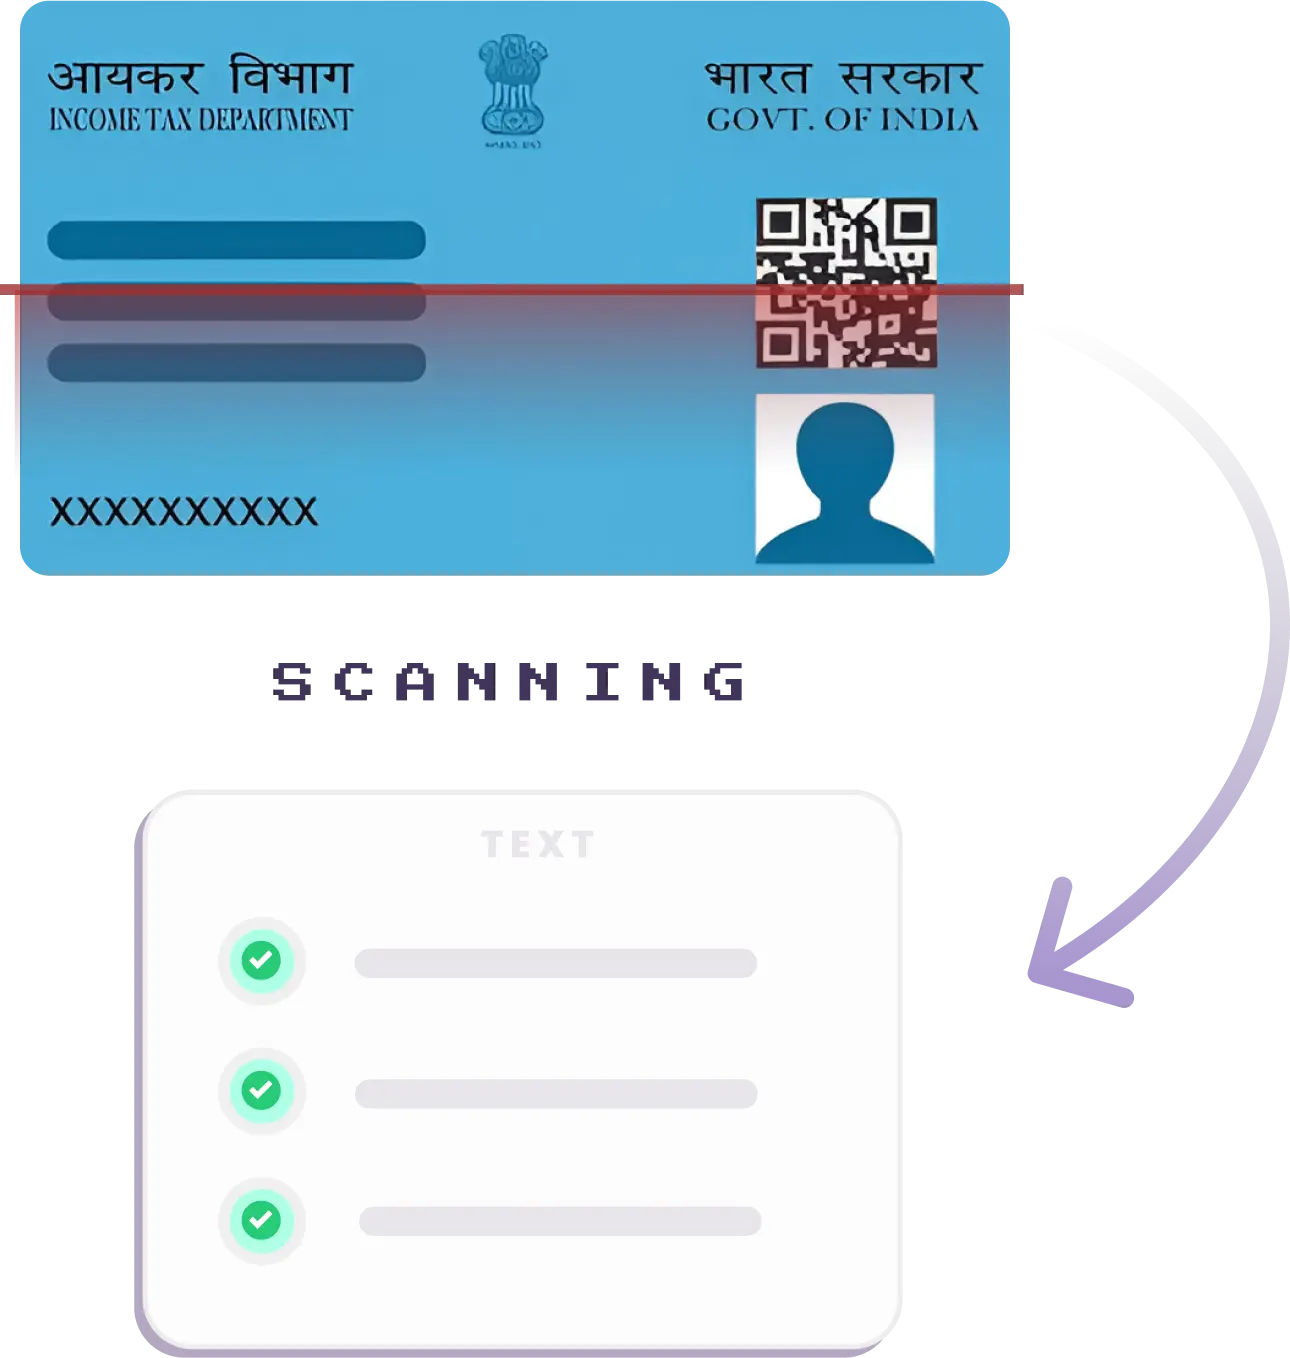 An illustration showing the process of scanning an Indian Income Tax Department card with a QR code, resulting in text output with green check marks.